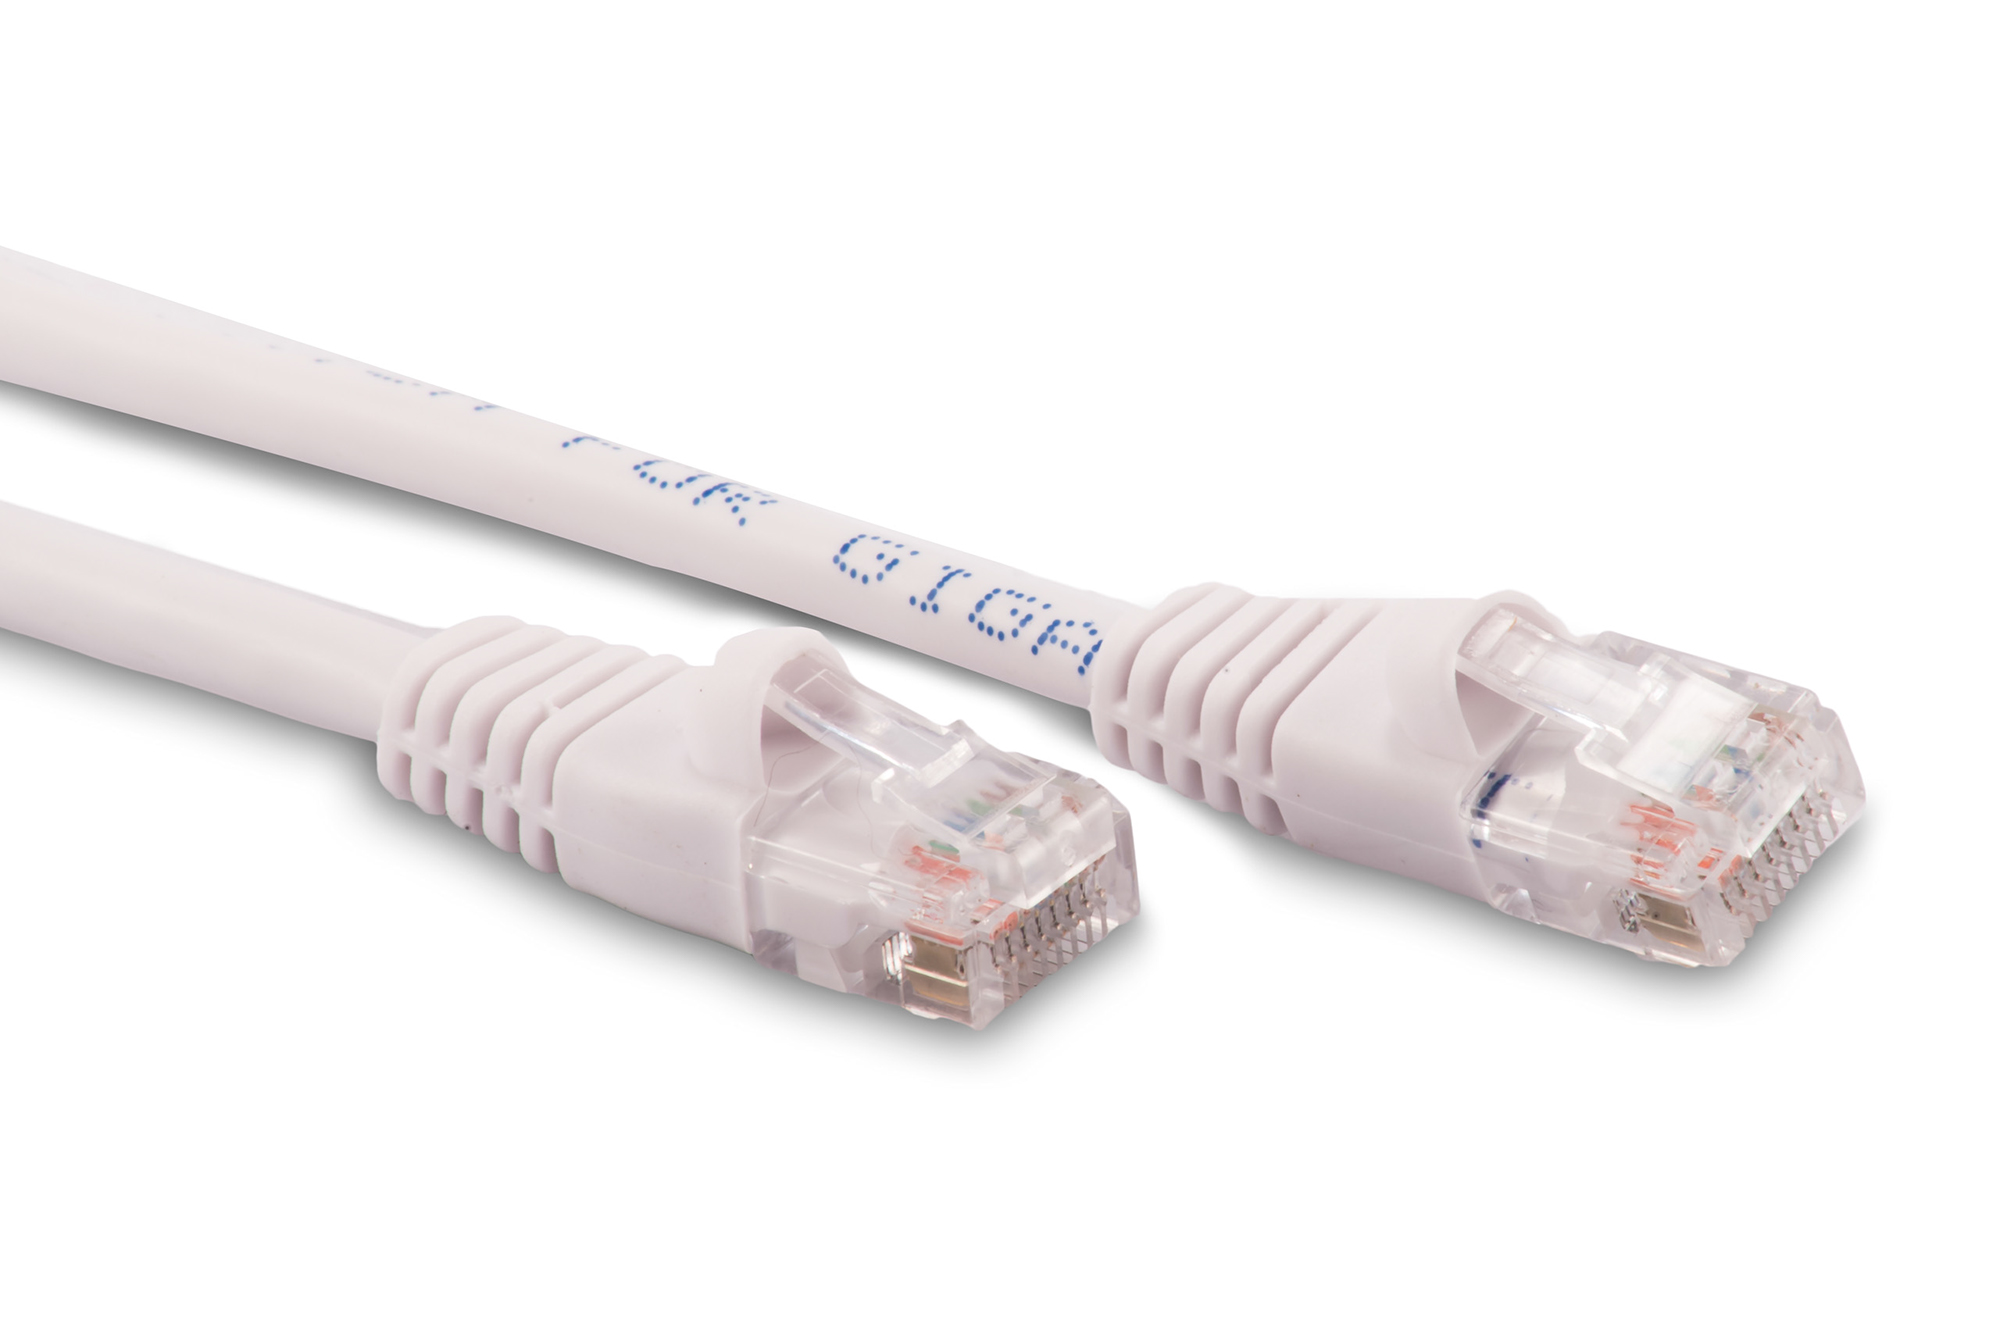 100ft Cat6 Ethernet Patch Cable - White Color - Snagless Boot